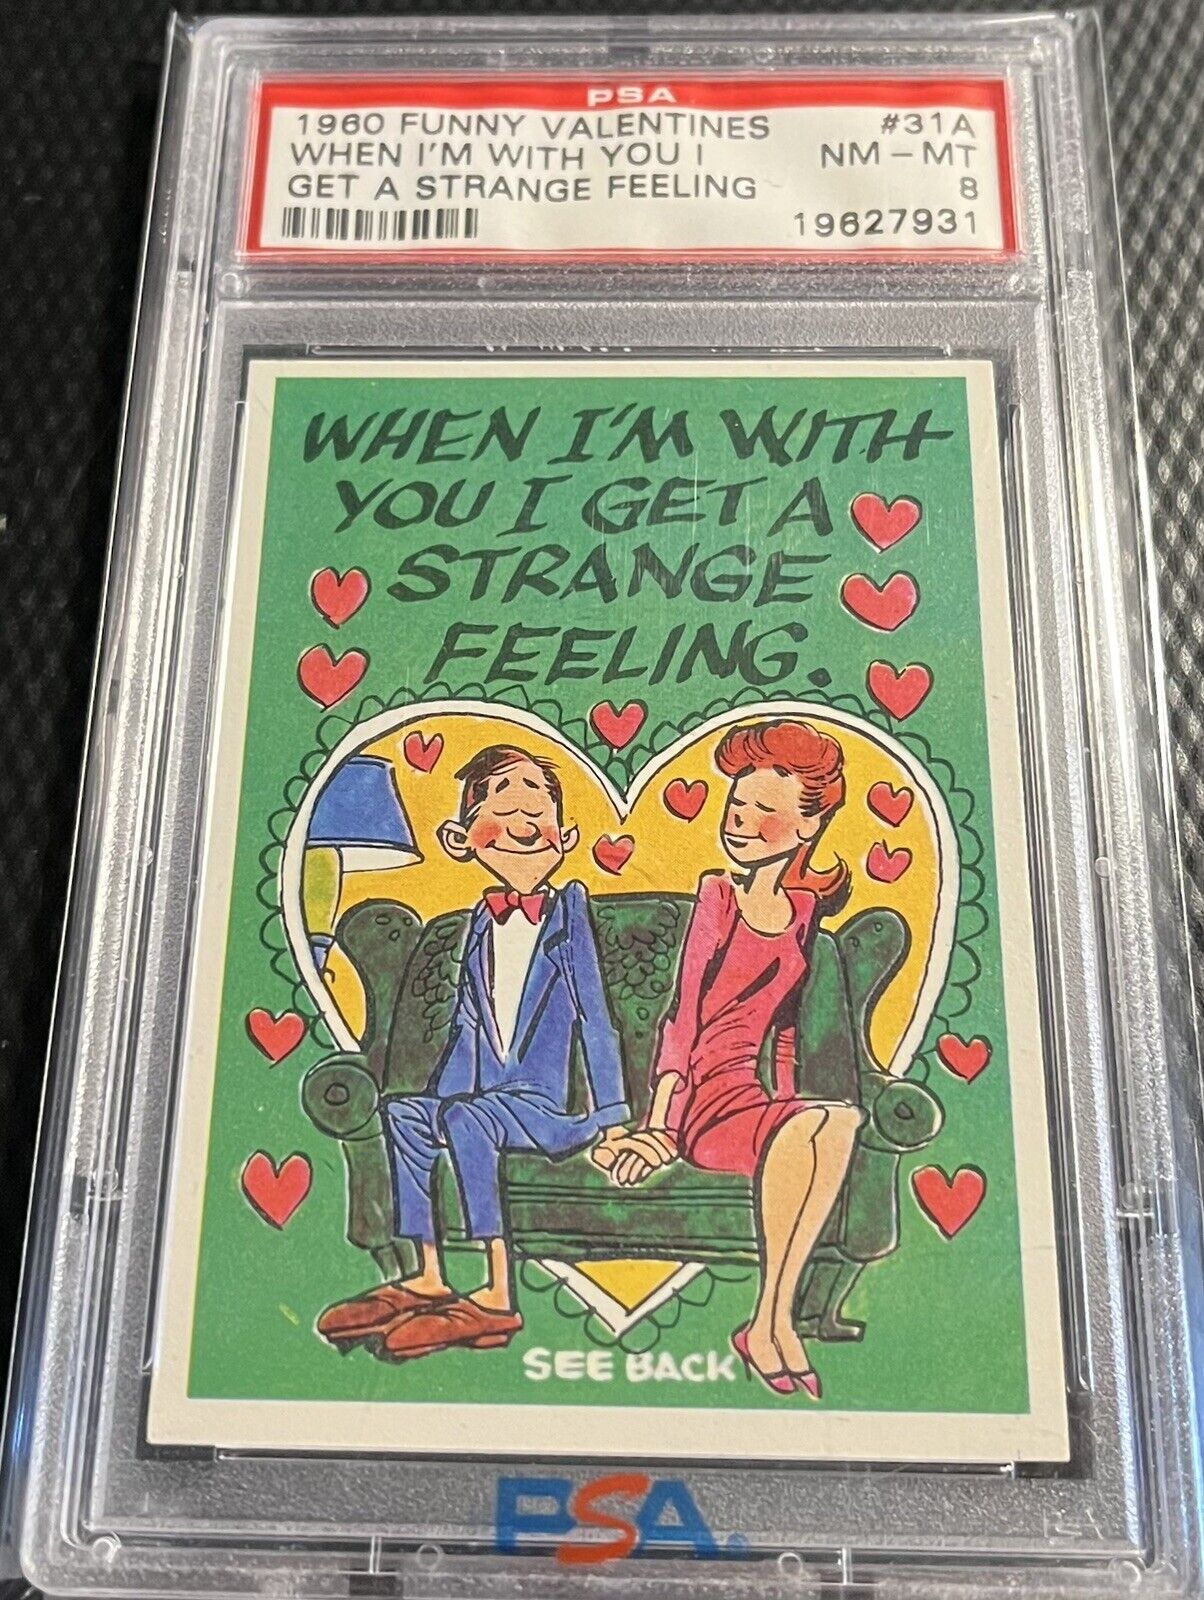 1960 Topps PSA 8 Vintage Funny Valentines #31A Graded NM-MT - Clean Holder